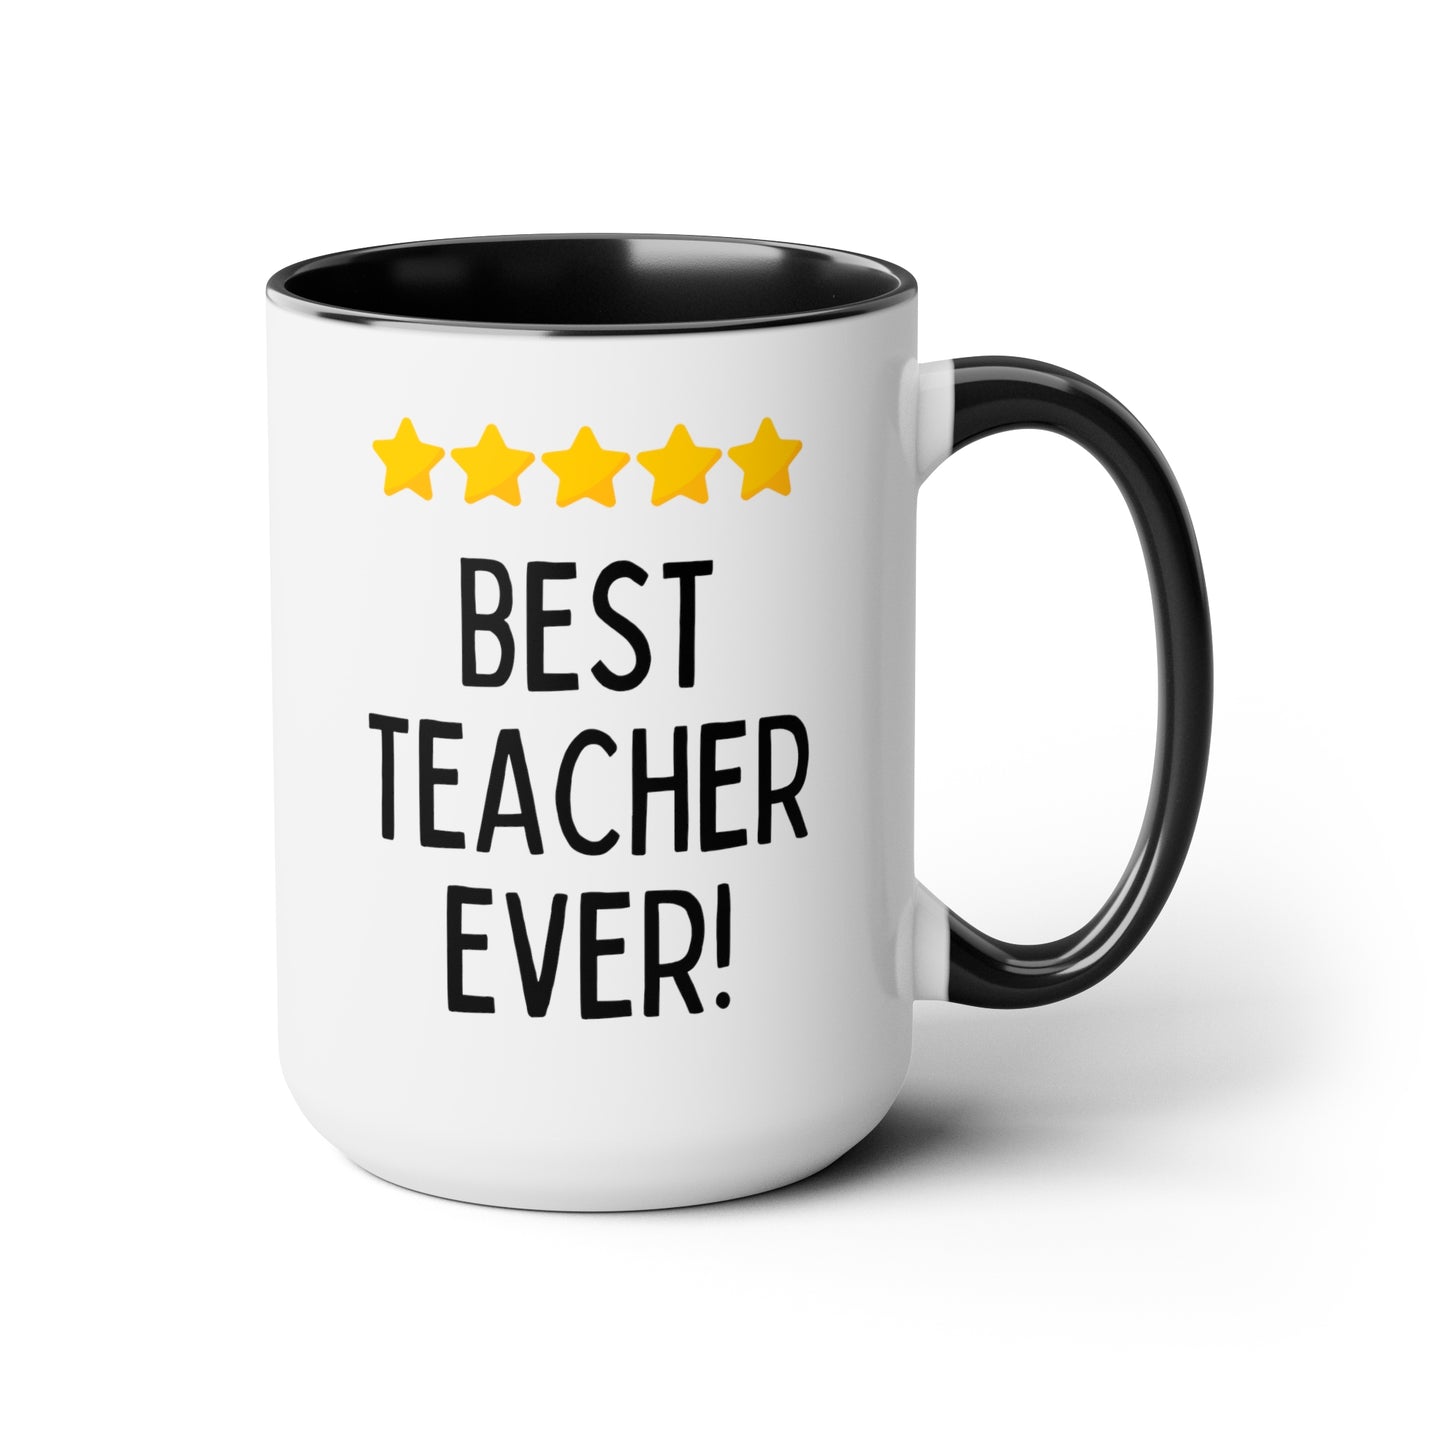 Best Teacher Ever 15oz white with black accent funny large coffee mug gift for educator teaching assistant end of the year present professor tutor five stars waveywares wavey wares wavywares wavy wares